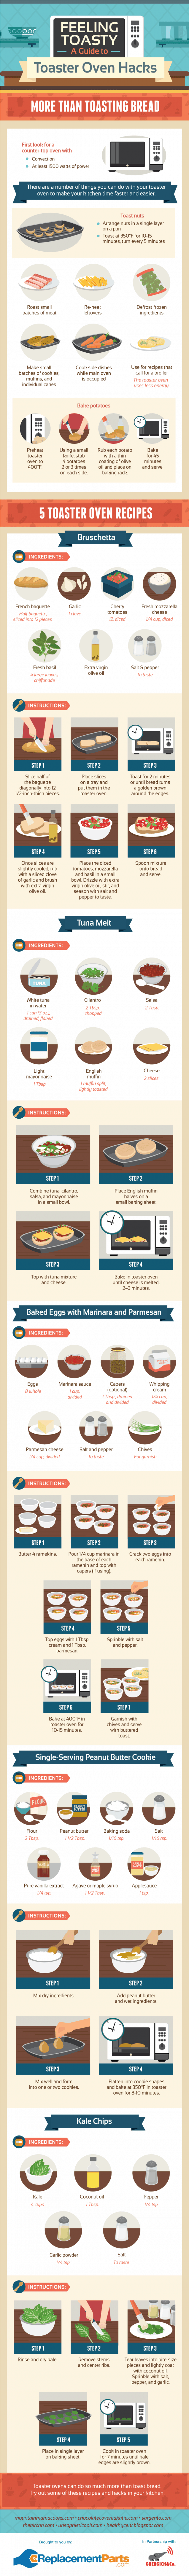 Guide For Easy Toaster Recipes Infographic